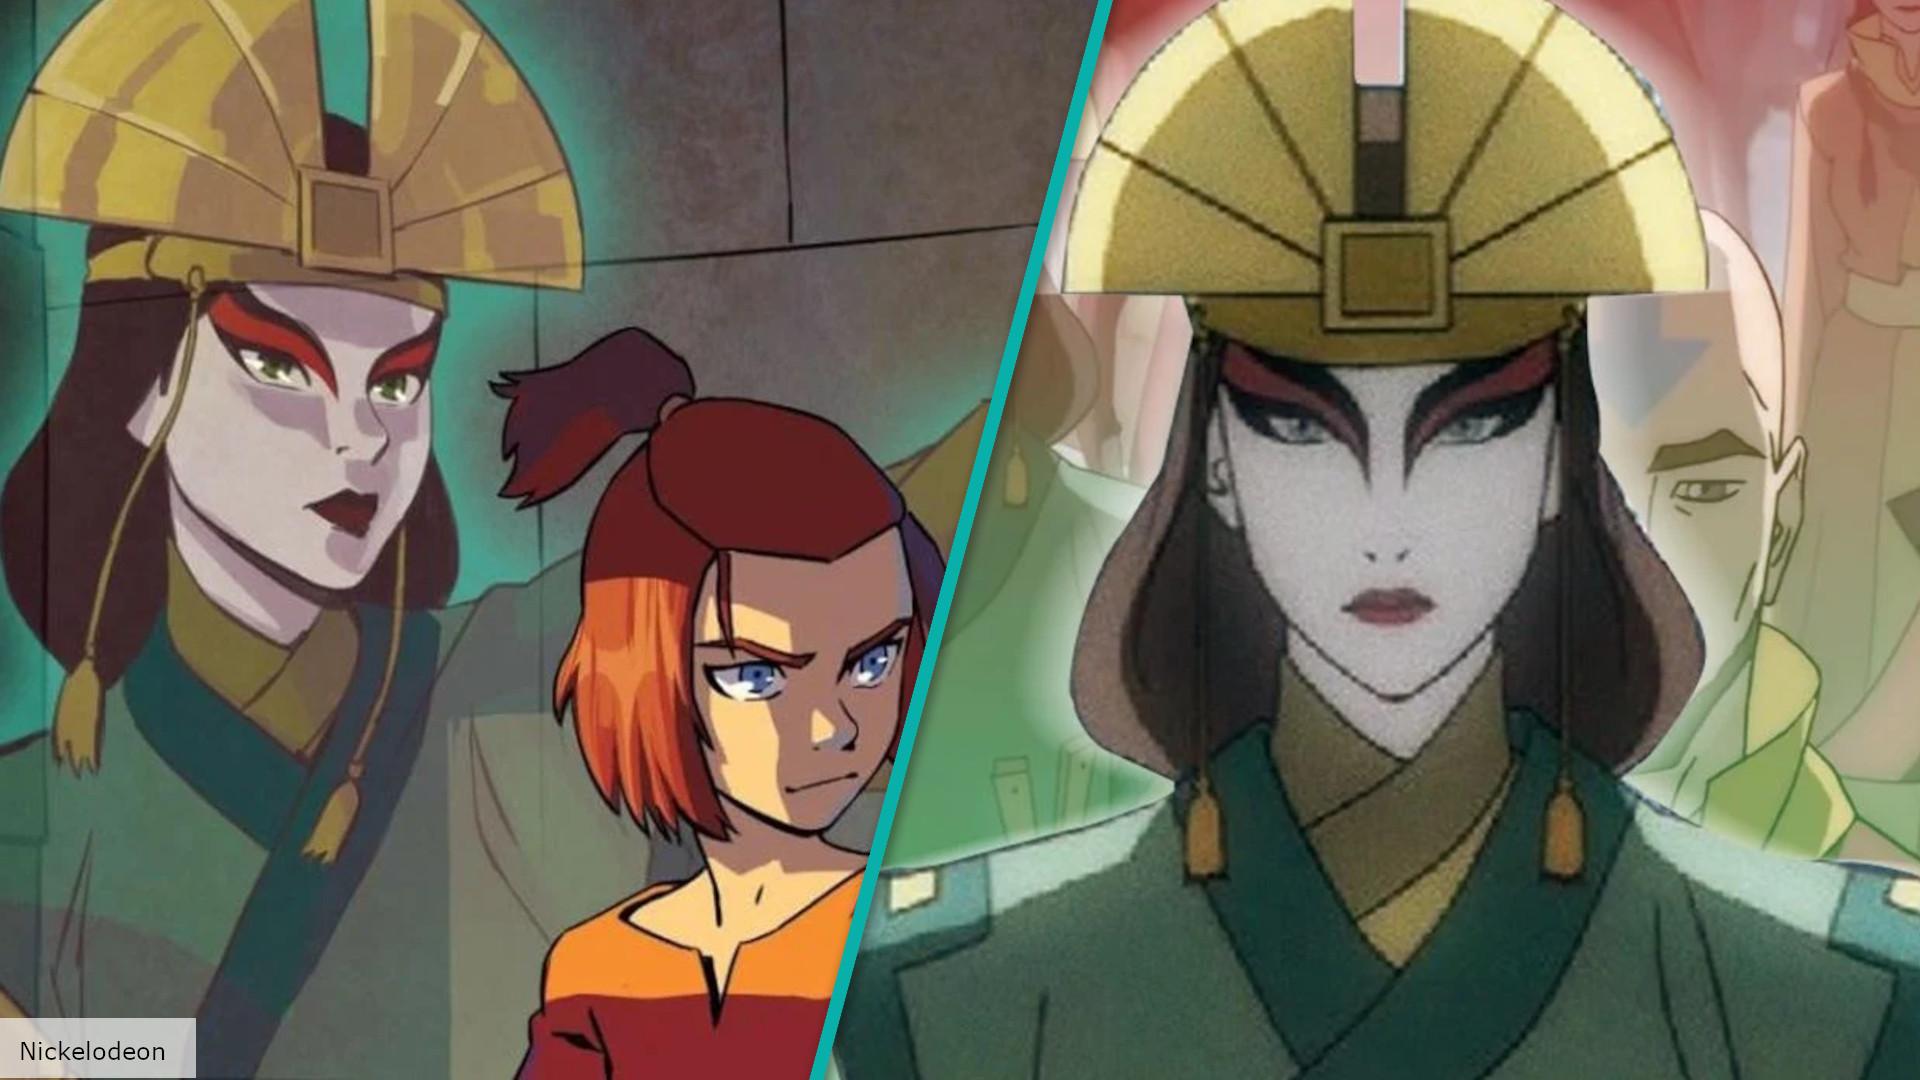 Netflix's Last Airbender series won't disappoint, says Kyoshi actor | The  Digital Fix